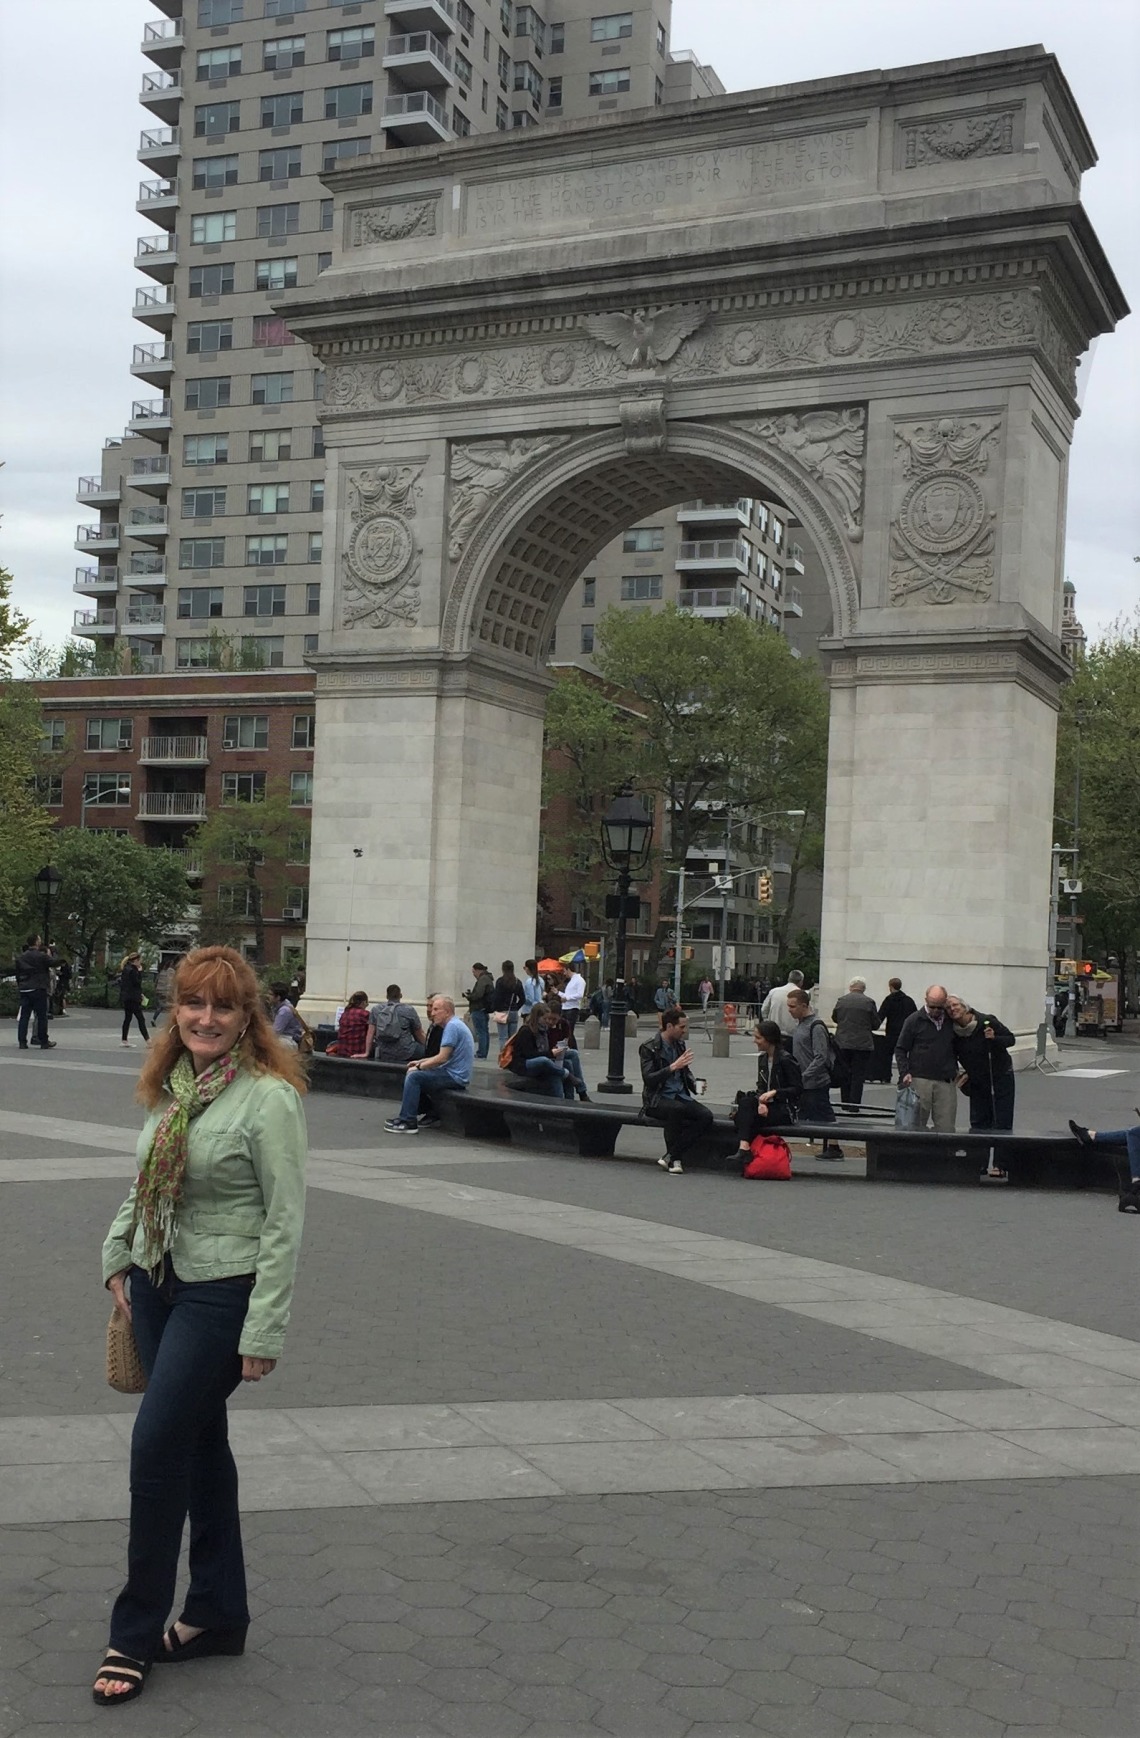 Corrina pictured in front of archway in New York City 